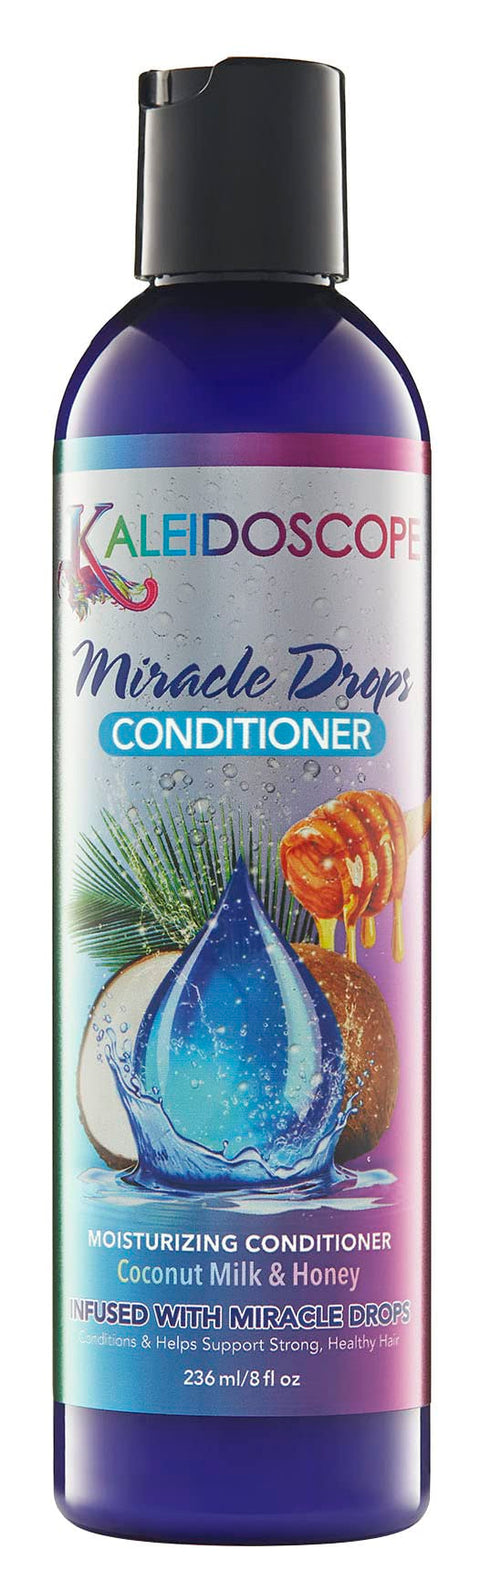 Kaleidoscope Miracle Drops Conditioner 8oz